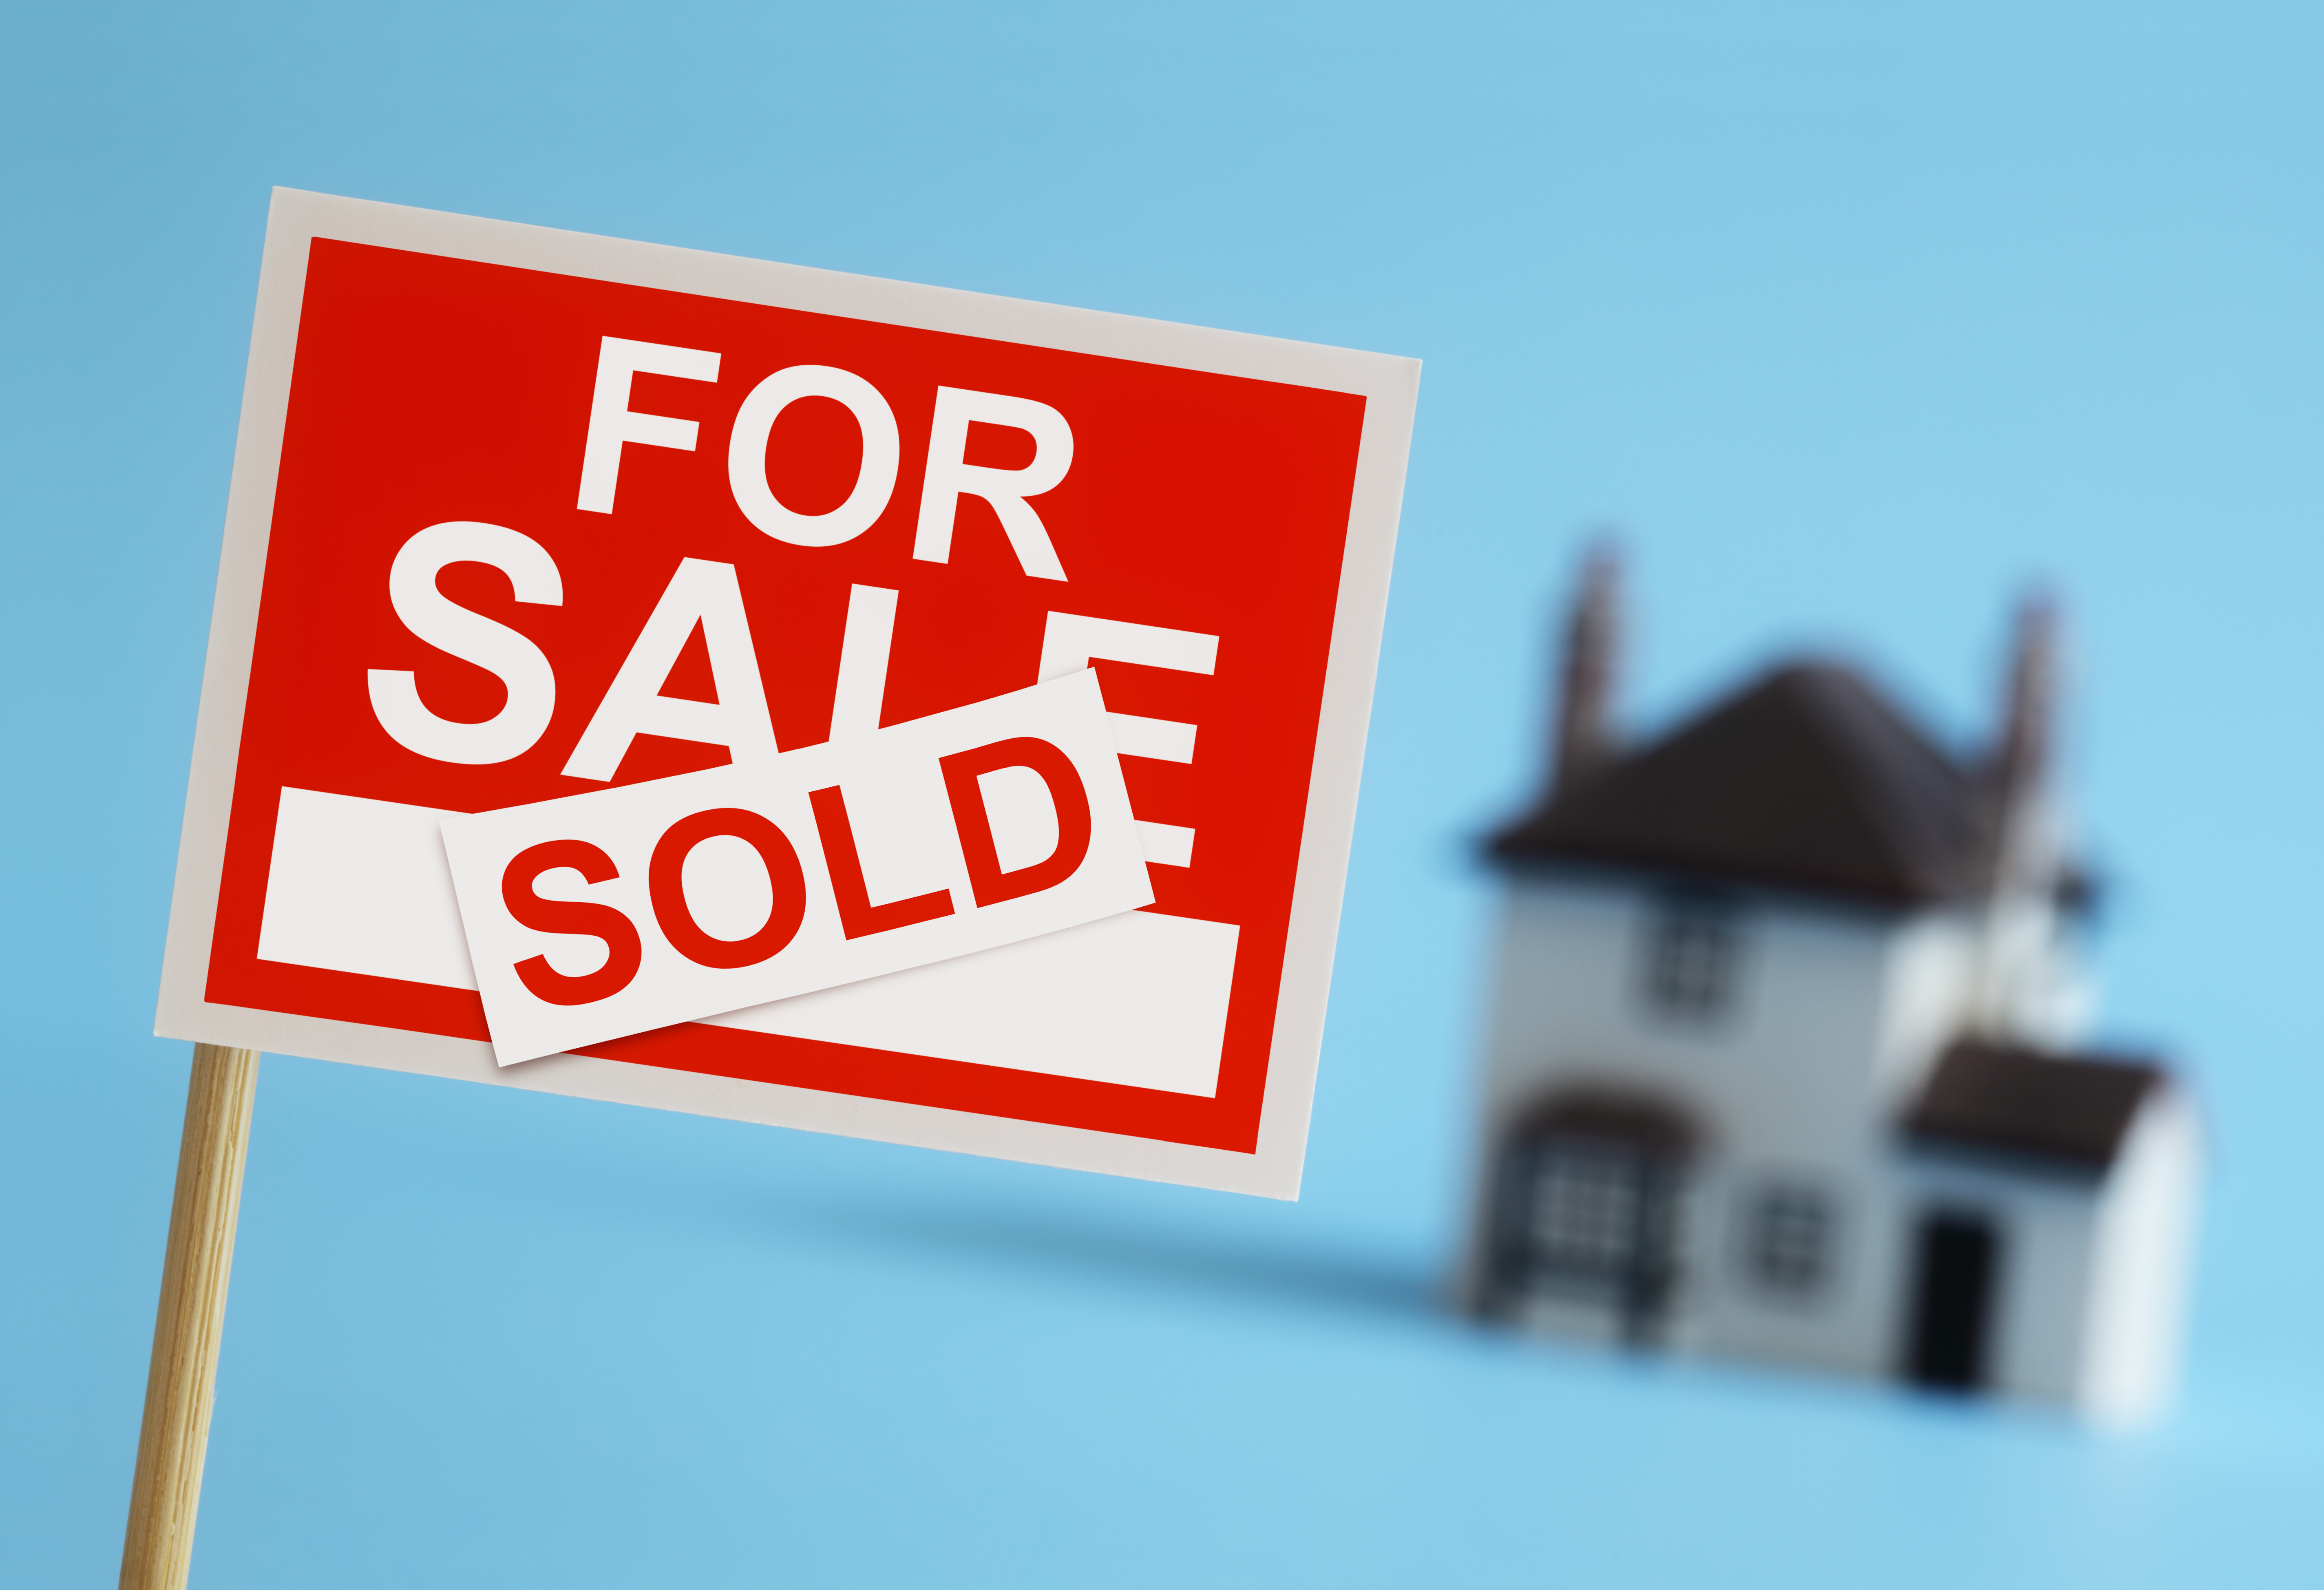 Real Estate Agents and the new TRID rules